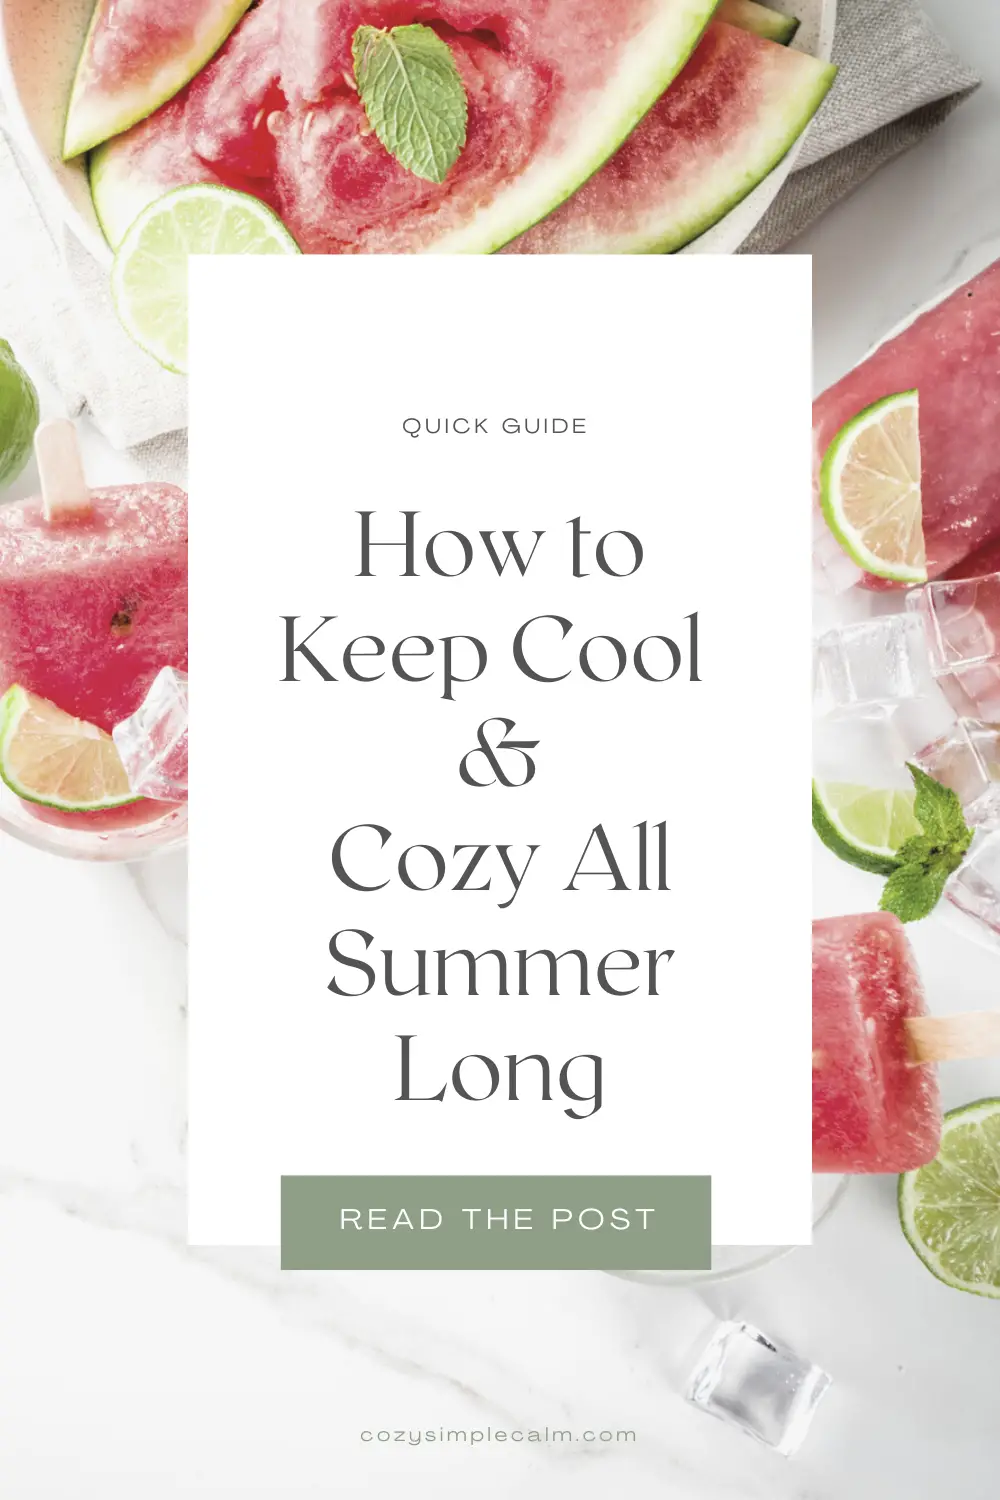 Image of sliced watermelon, mint leaves, lime slices, and ice cubes - Text overlay: How to keep cool & cozy all summer long - cozysimplecalm.com